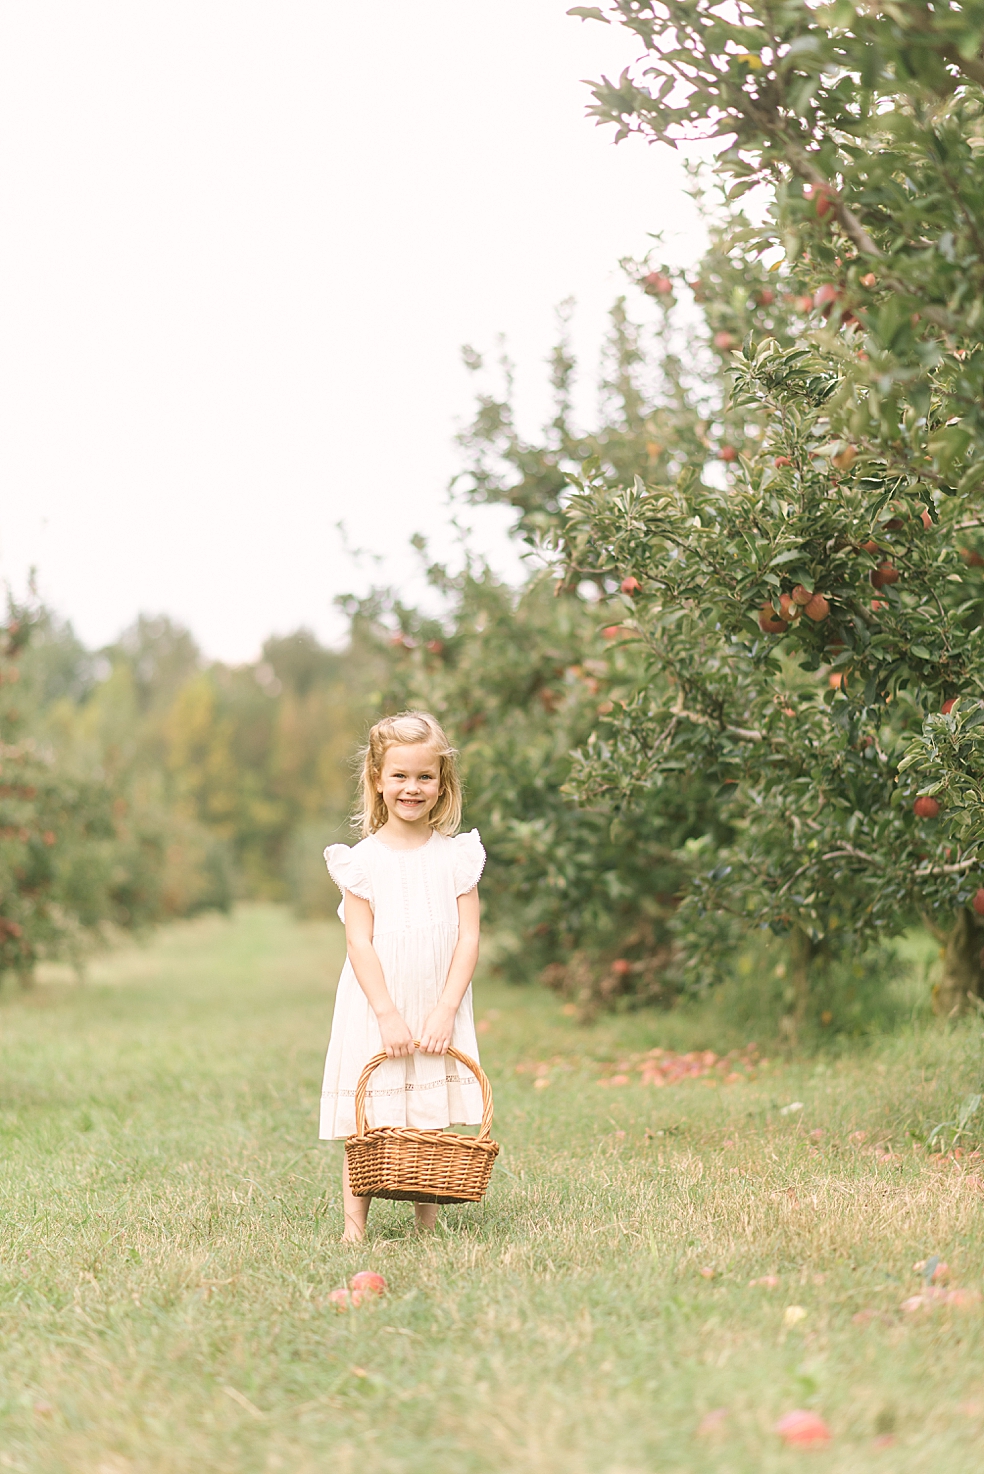 Little girl in cream colored dress holding a basket of apples | Photo by Jessica Lee Photography